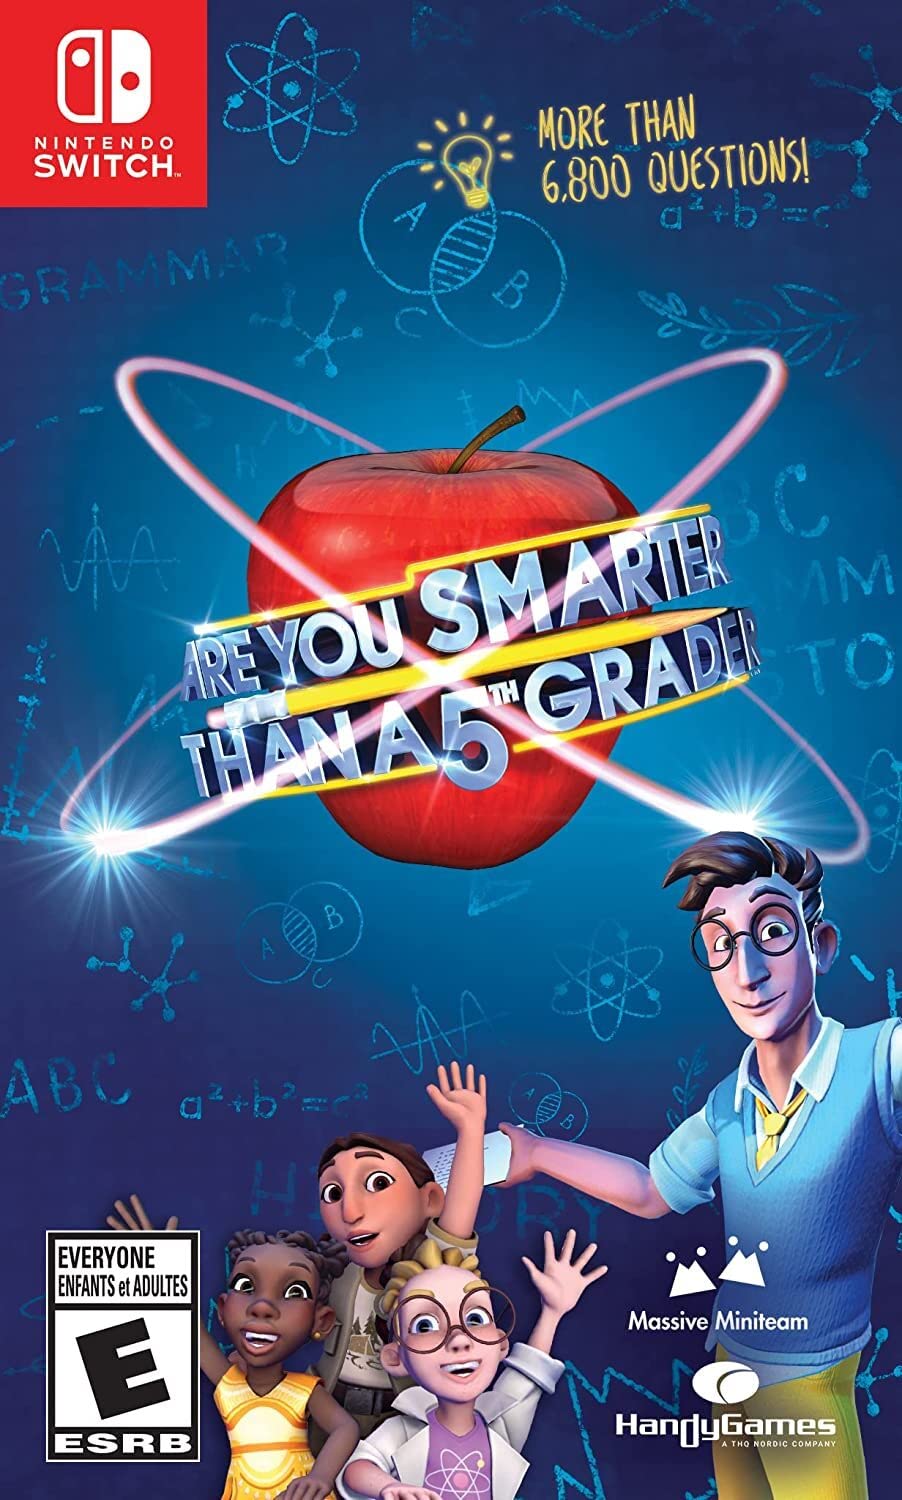 Are You Smarter Than A 5th Grader? (Nintendo Switch, PS5 or XB1) $15 + Free Shipping w/ Prime or on orders over $25